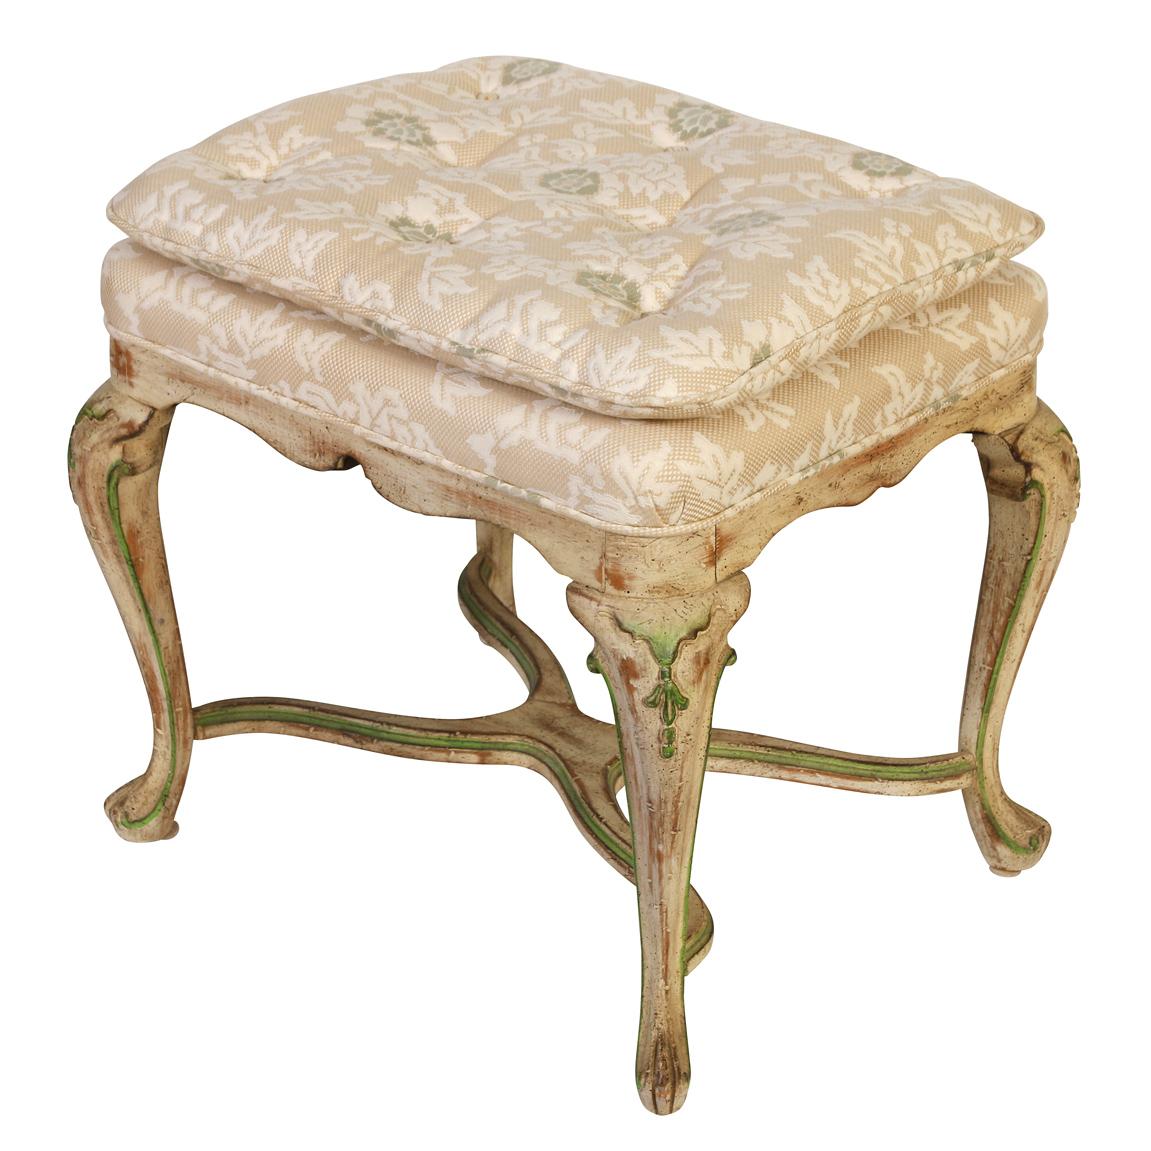 A vintage Louis XV style painted and upholstered small bench.  The graceful cabriole bench legs are painted a distressed cream with green accents and meet with a curved X stretcher.  The seat is upholstered in a neutral, soft tufted fabric.  